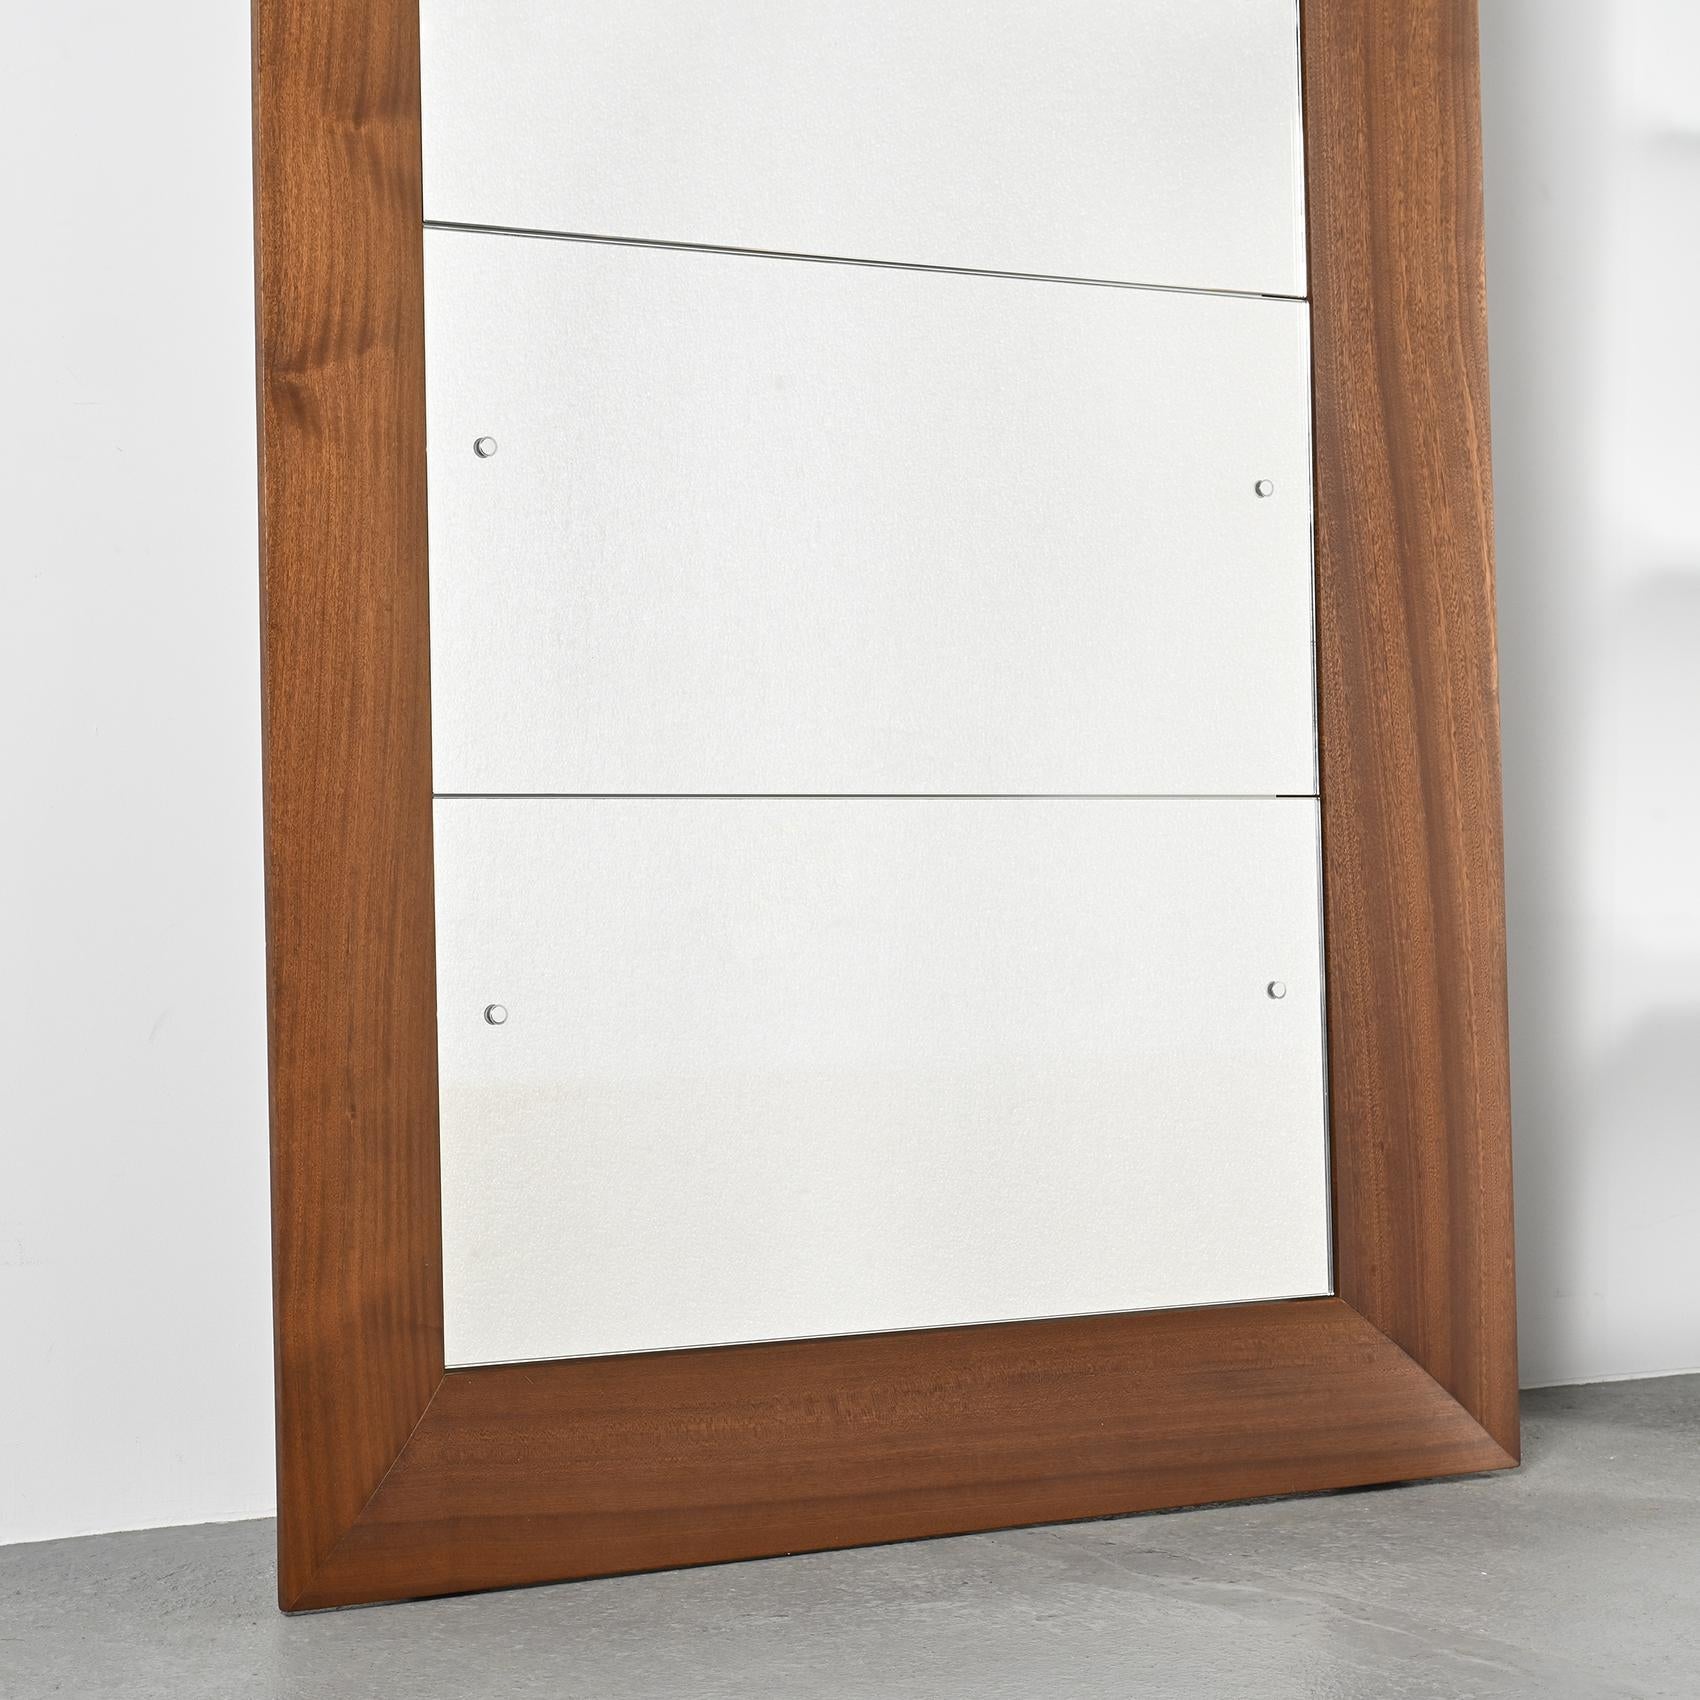 A Pair of Modular Mirror-Bookshelves by Philippe Starck, Driade 2007 For Sale 7